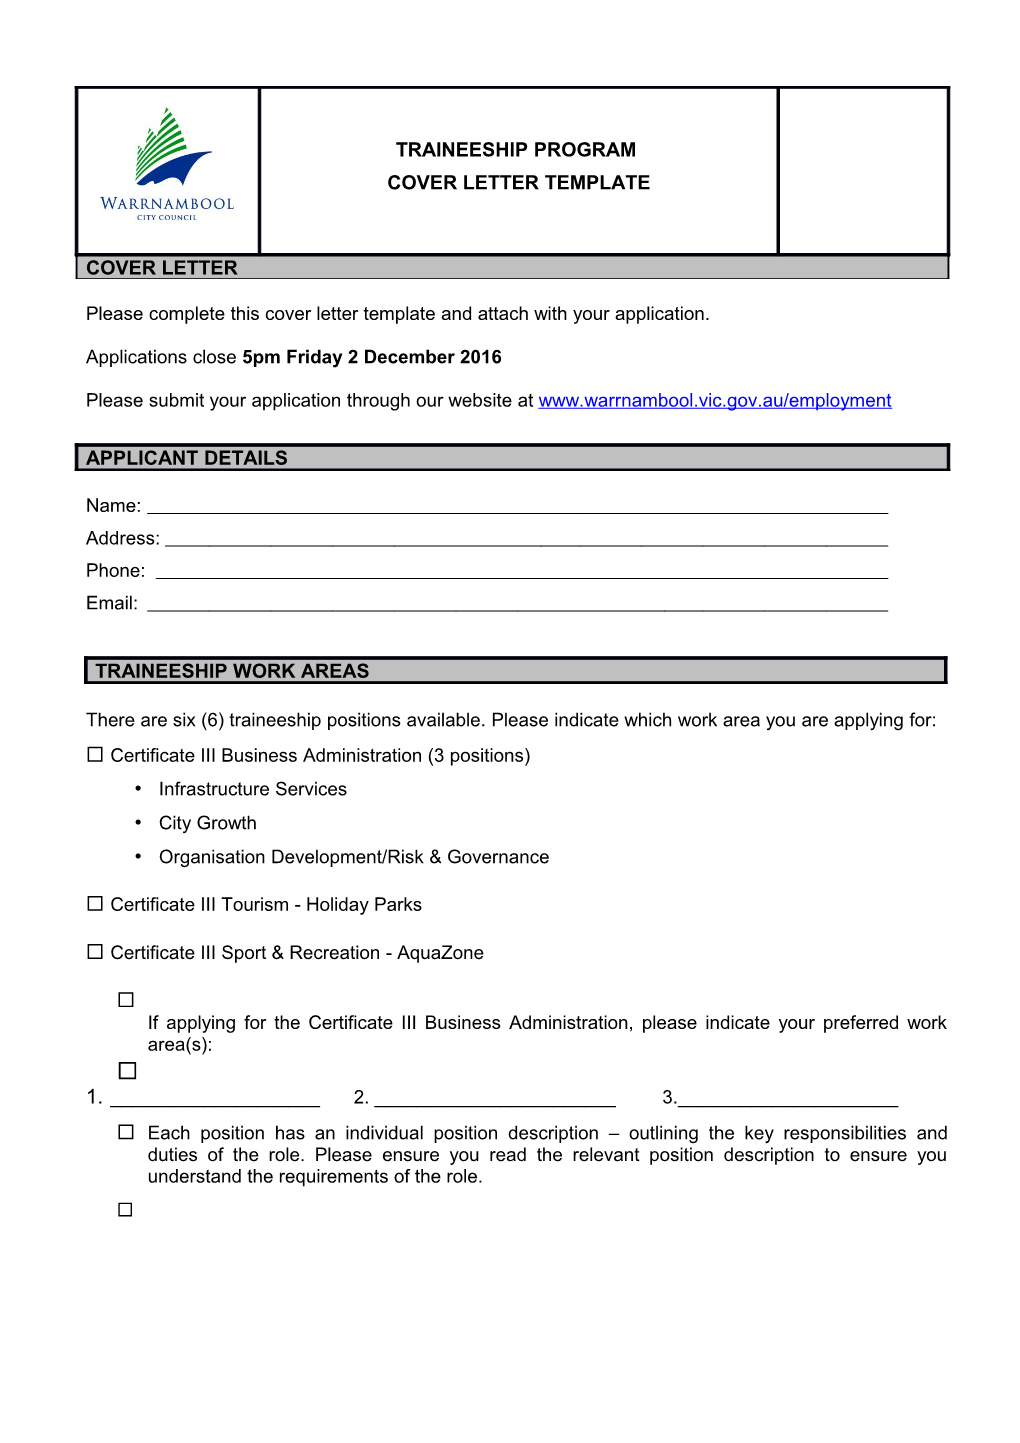 Please Complete This Cover Letter Template and Attach with Your Application